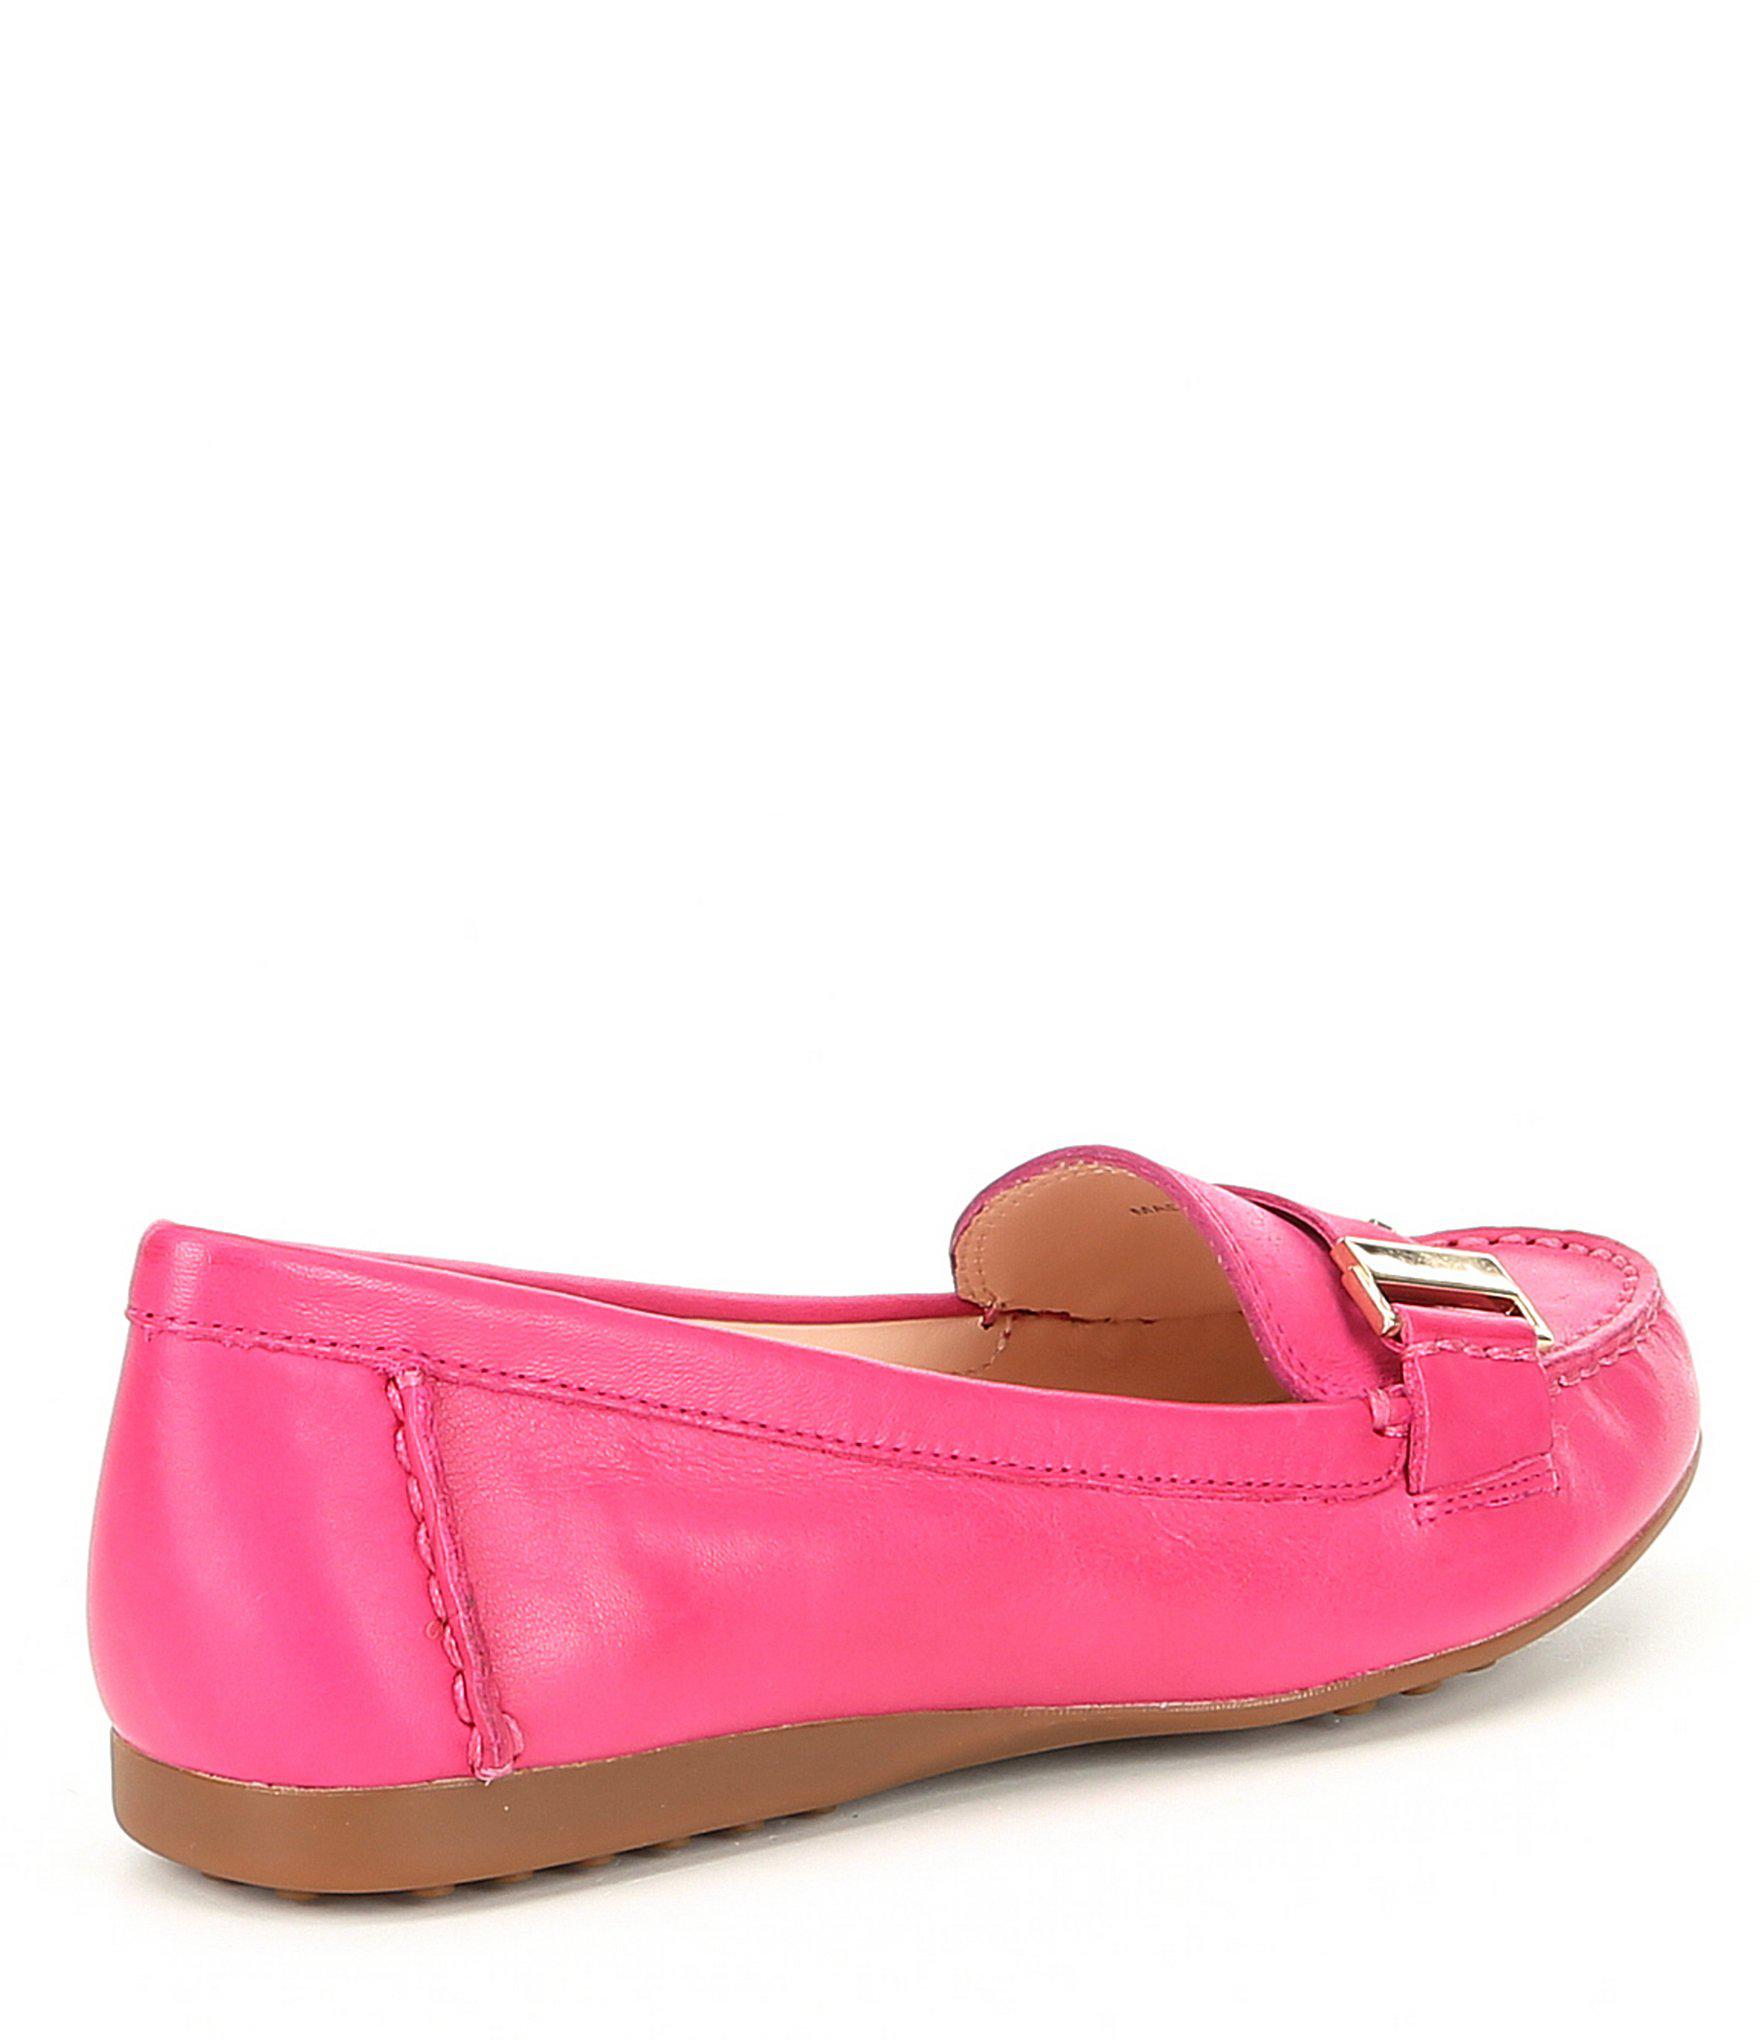 Kate Spade Colette Leather Logo Loafers in Deep Pink (Pink) - Lyst